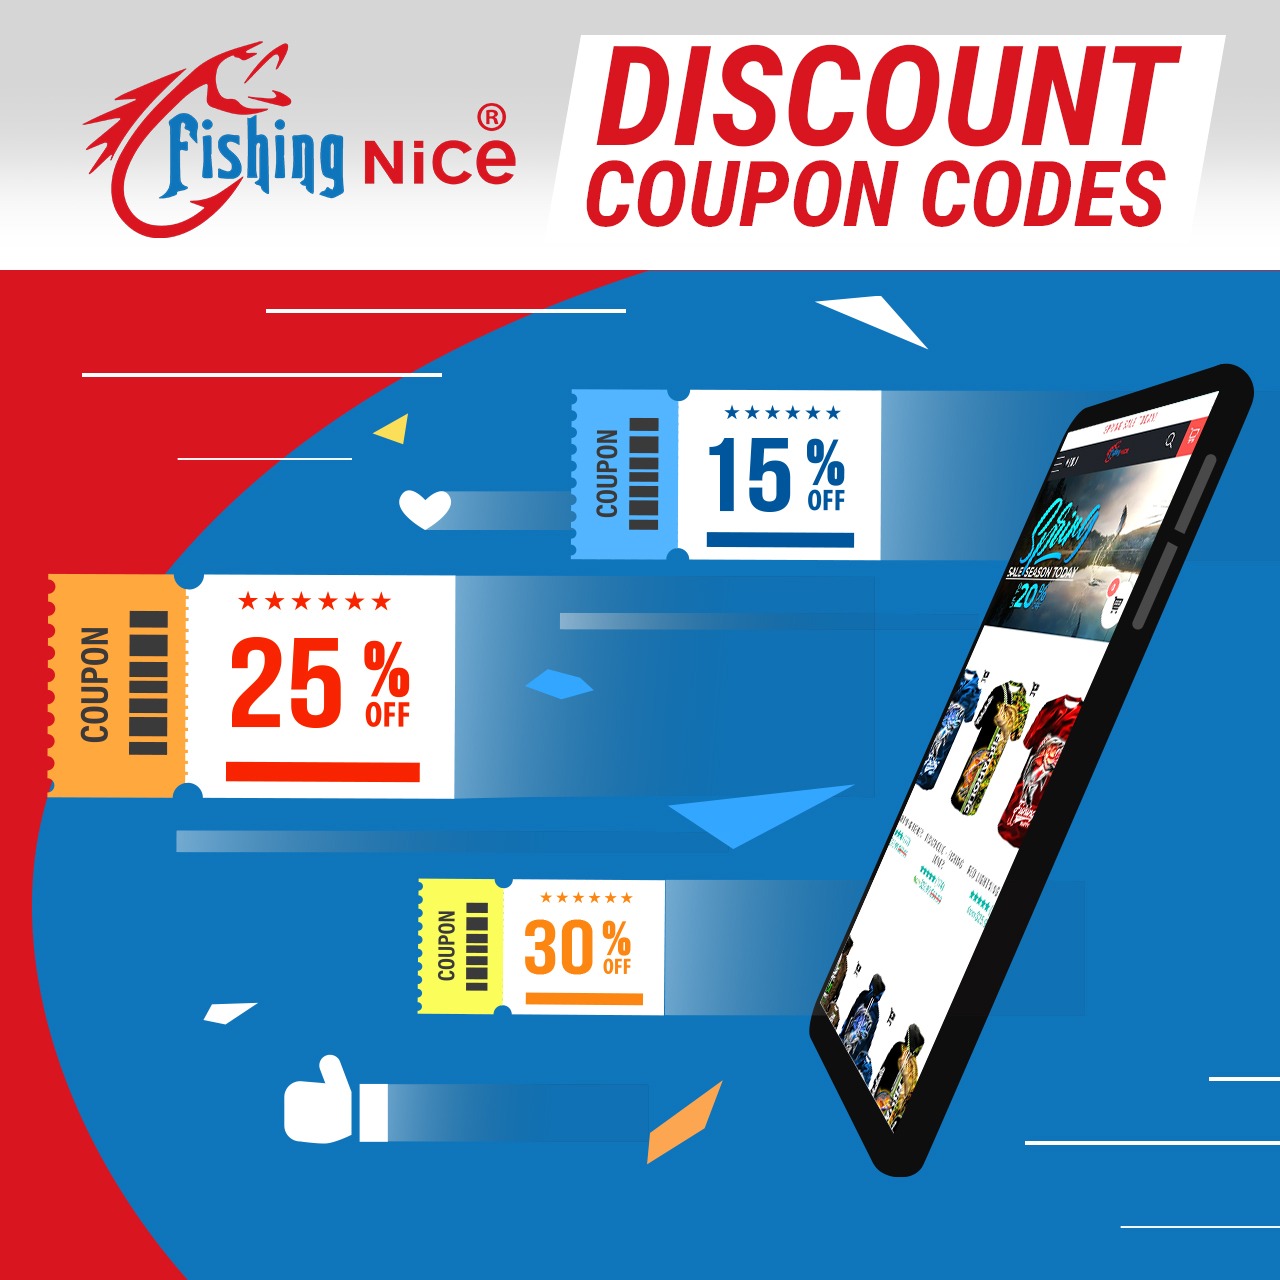 Fishing Nice Discount Coupon Codes